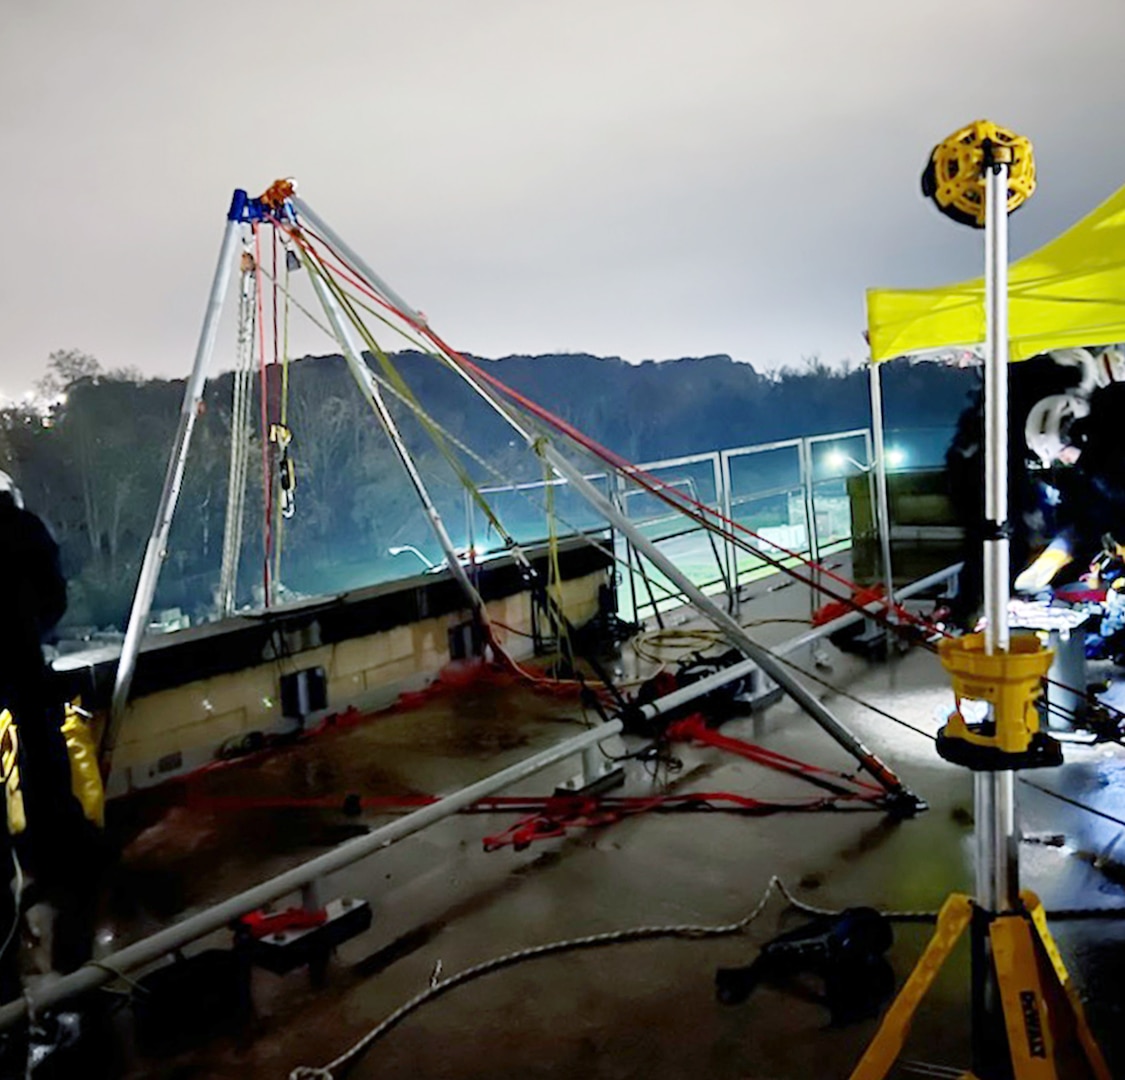 Cranes and other equipment in a nighttime search and rescue